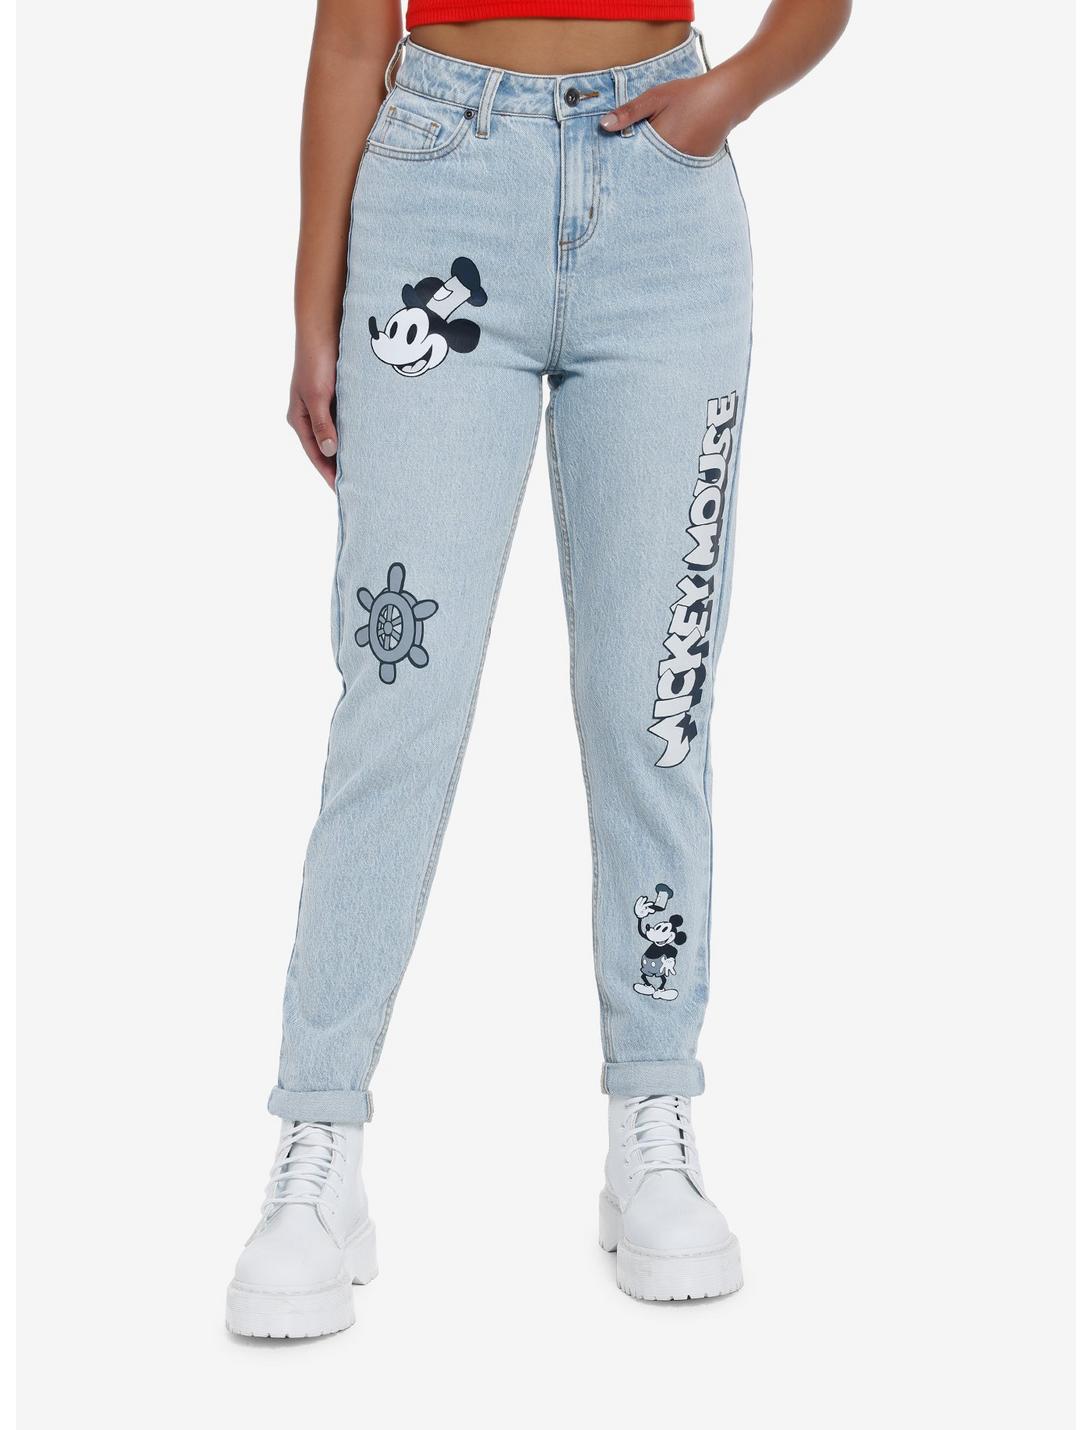 Golf Begin geluk Disney Mickey Mouse Steamboat Willie Mom Jeans | Her Universe